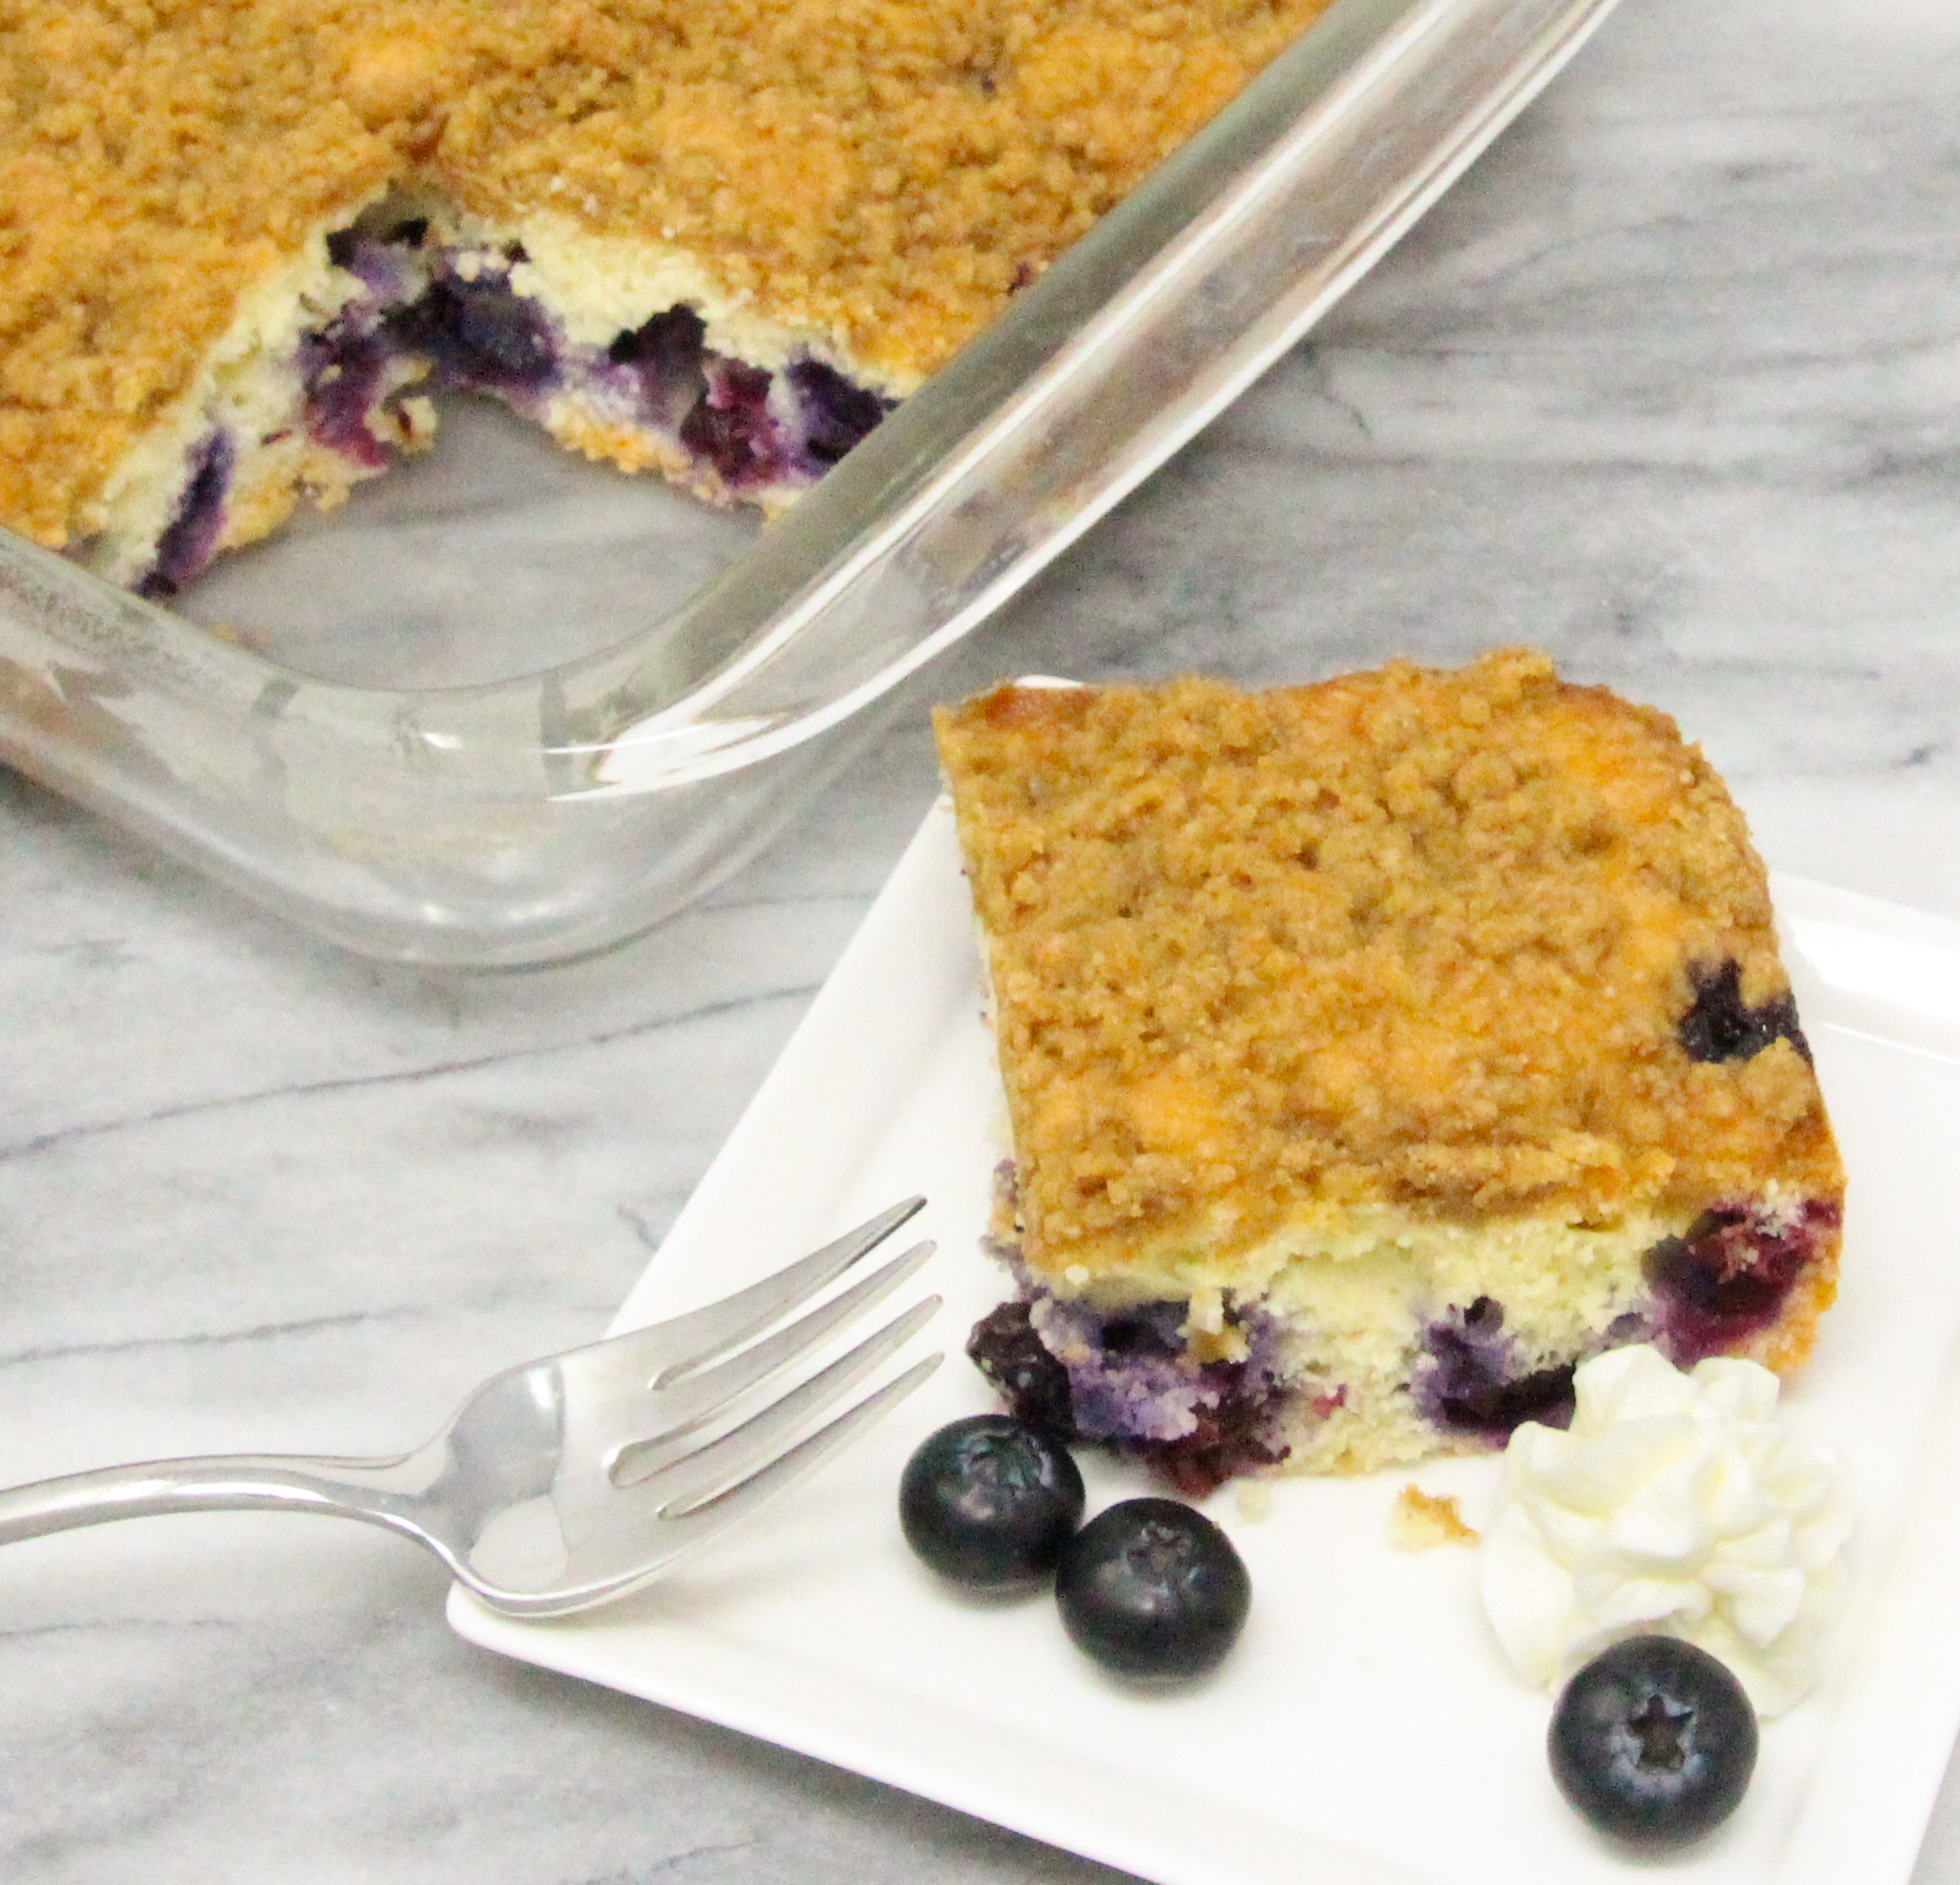 Blueberry Coffee Cake with Crumble is chock full of fresh blueberries in a tender vanilla cake. The cinnamon, brown sugar-based crumble adds both flavor and a pleasing crunchy texture. Recipe shared with permission granted by Krista Davis, author of A COLORFUL SCHEME. 